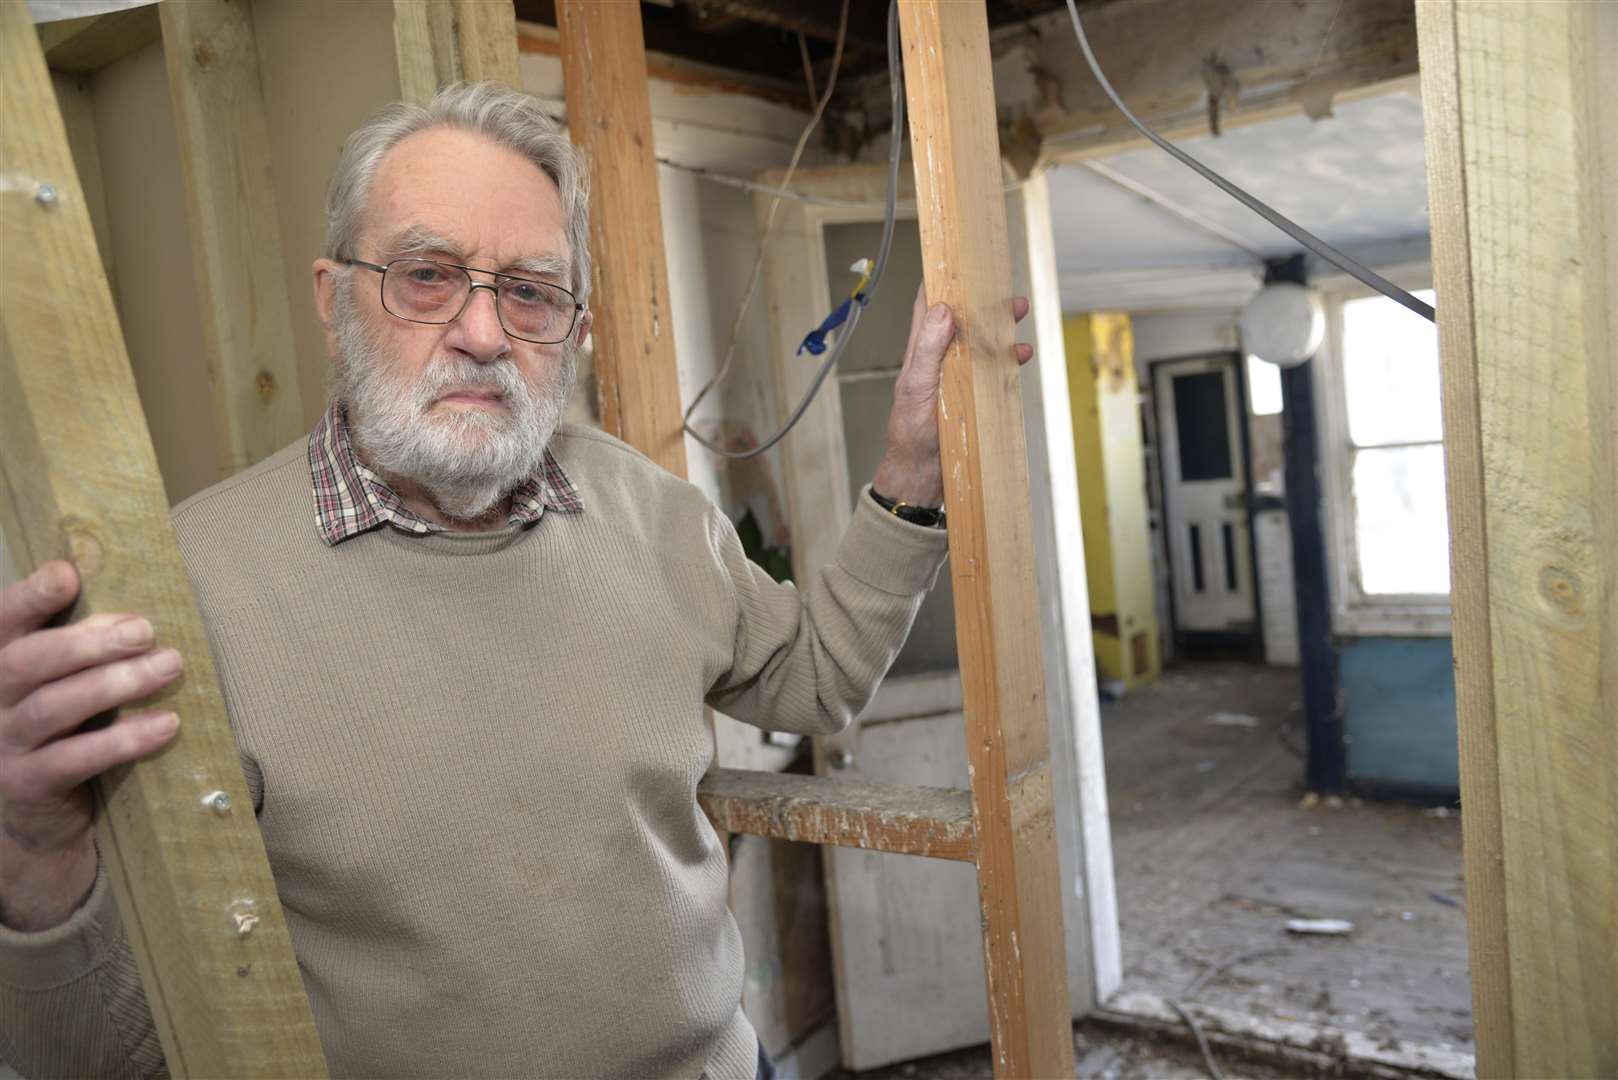 91-year-old Derrick Bensted's home was cut in half after a legal dispute with Whitstable Oyster Company